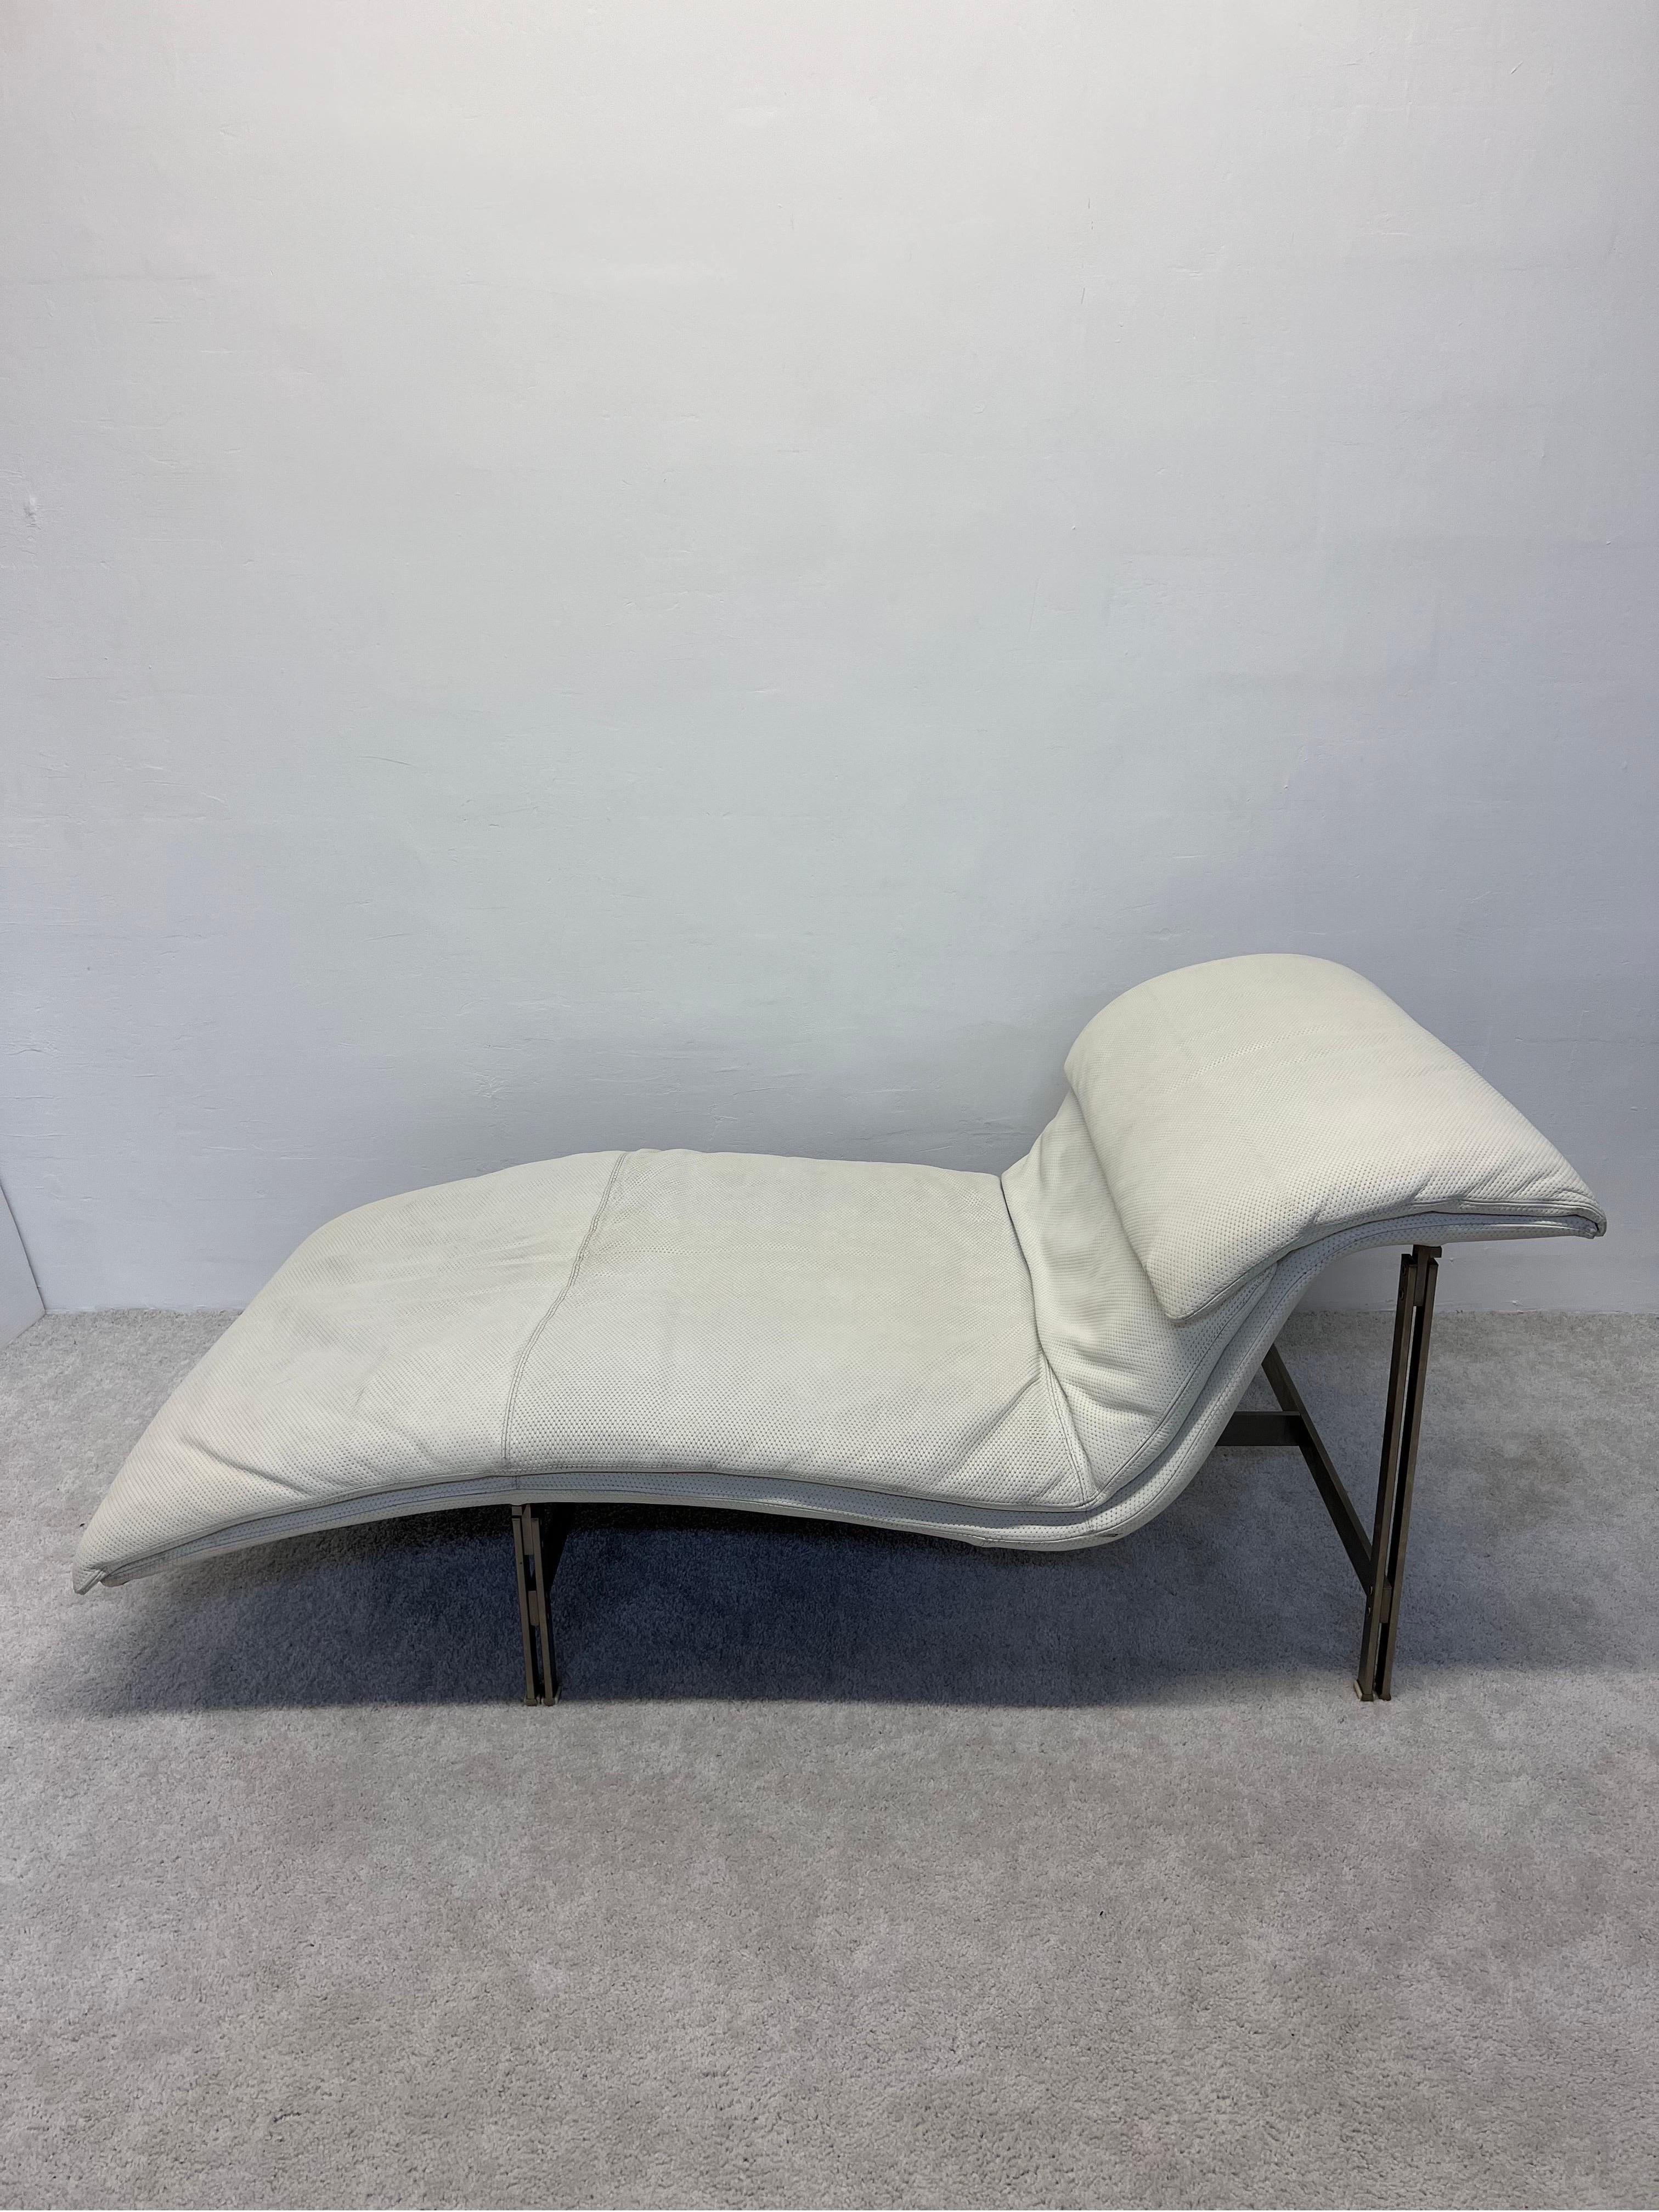 Single perforated white leather Onda wave chaise lounge by Giovanni Offredi for Saporiti Italia. Maintains original label. 

Leather has been professionally cleaned, whitened and conditioned to bring the leather back as close to original as